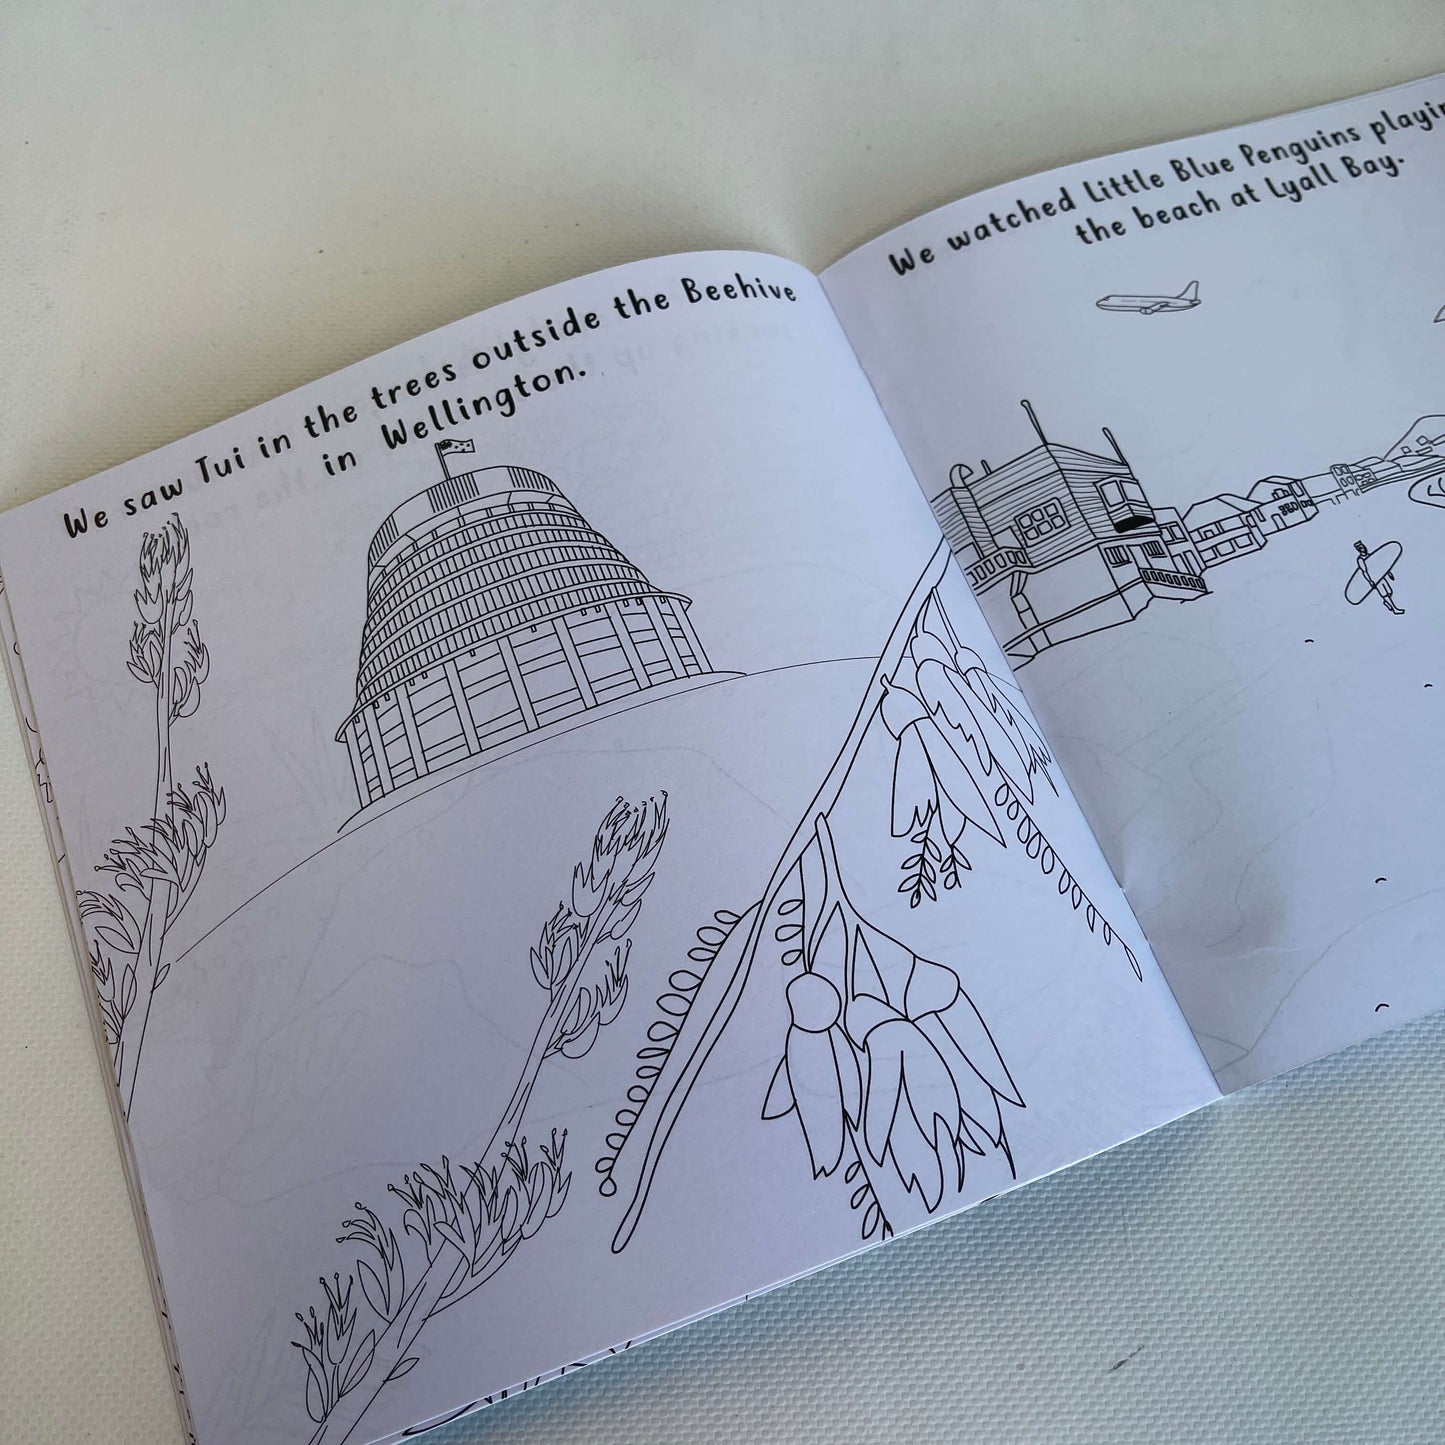 Pages from a childrens colouring book showing the Beehive parliment building.